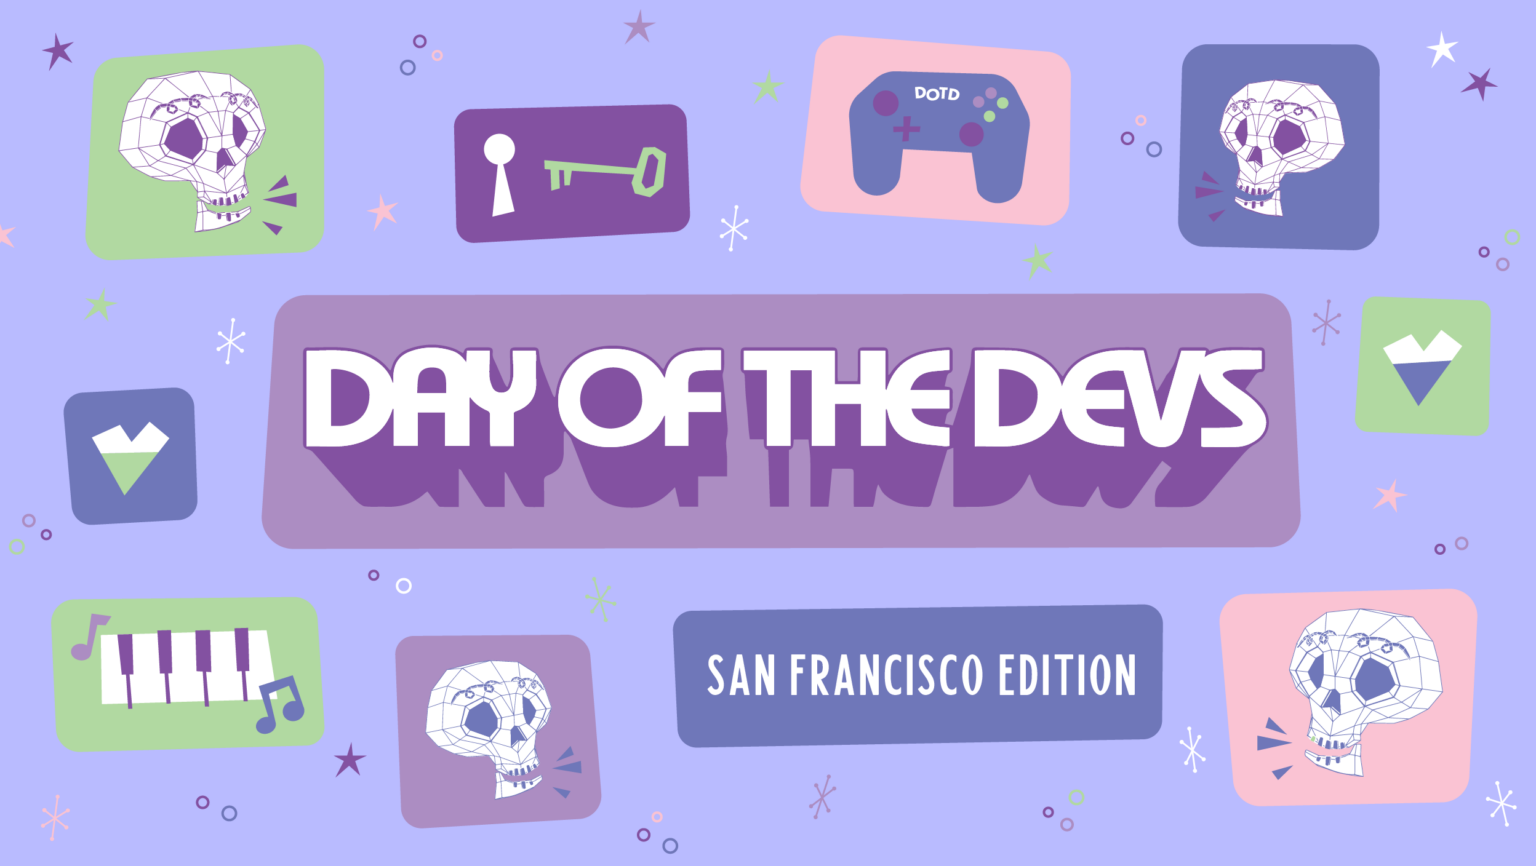 Events Day of the Devs